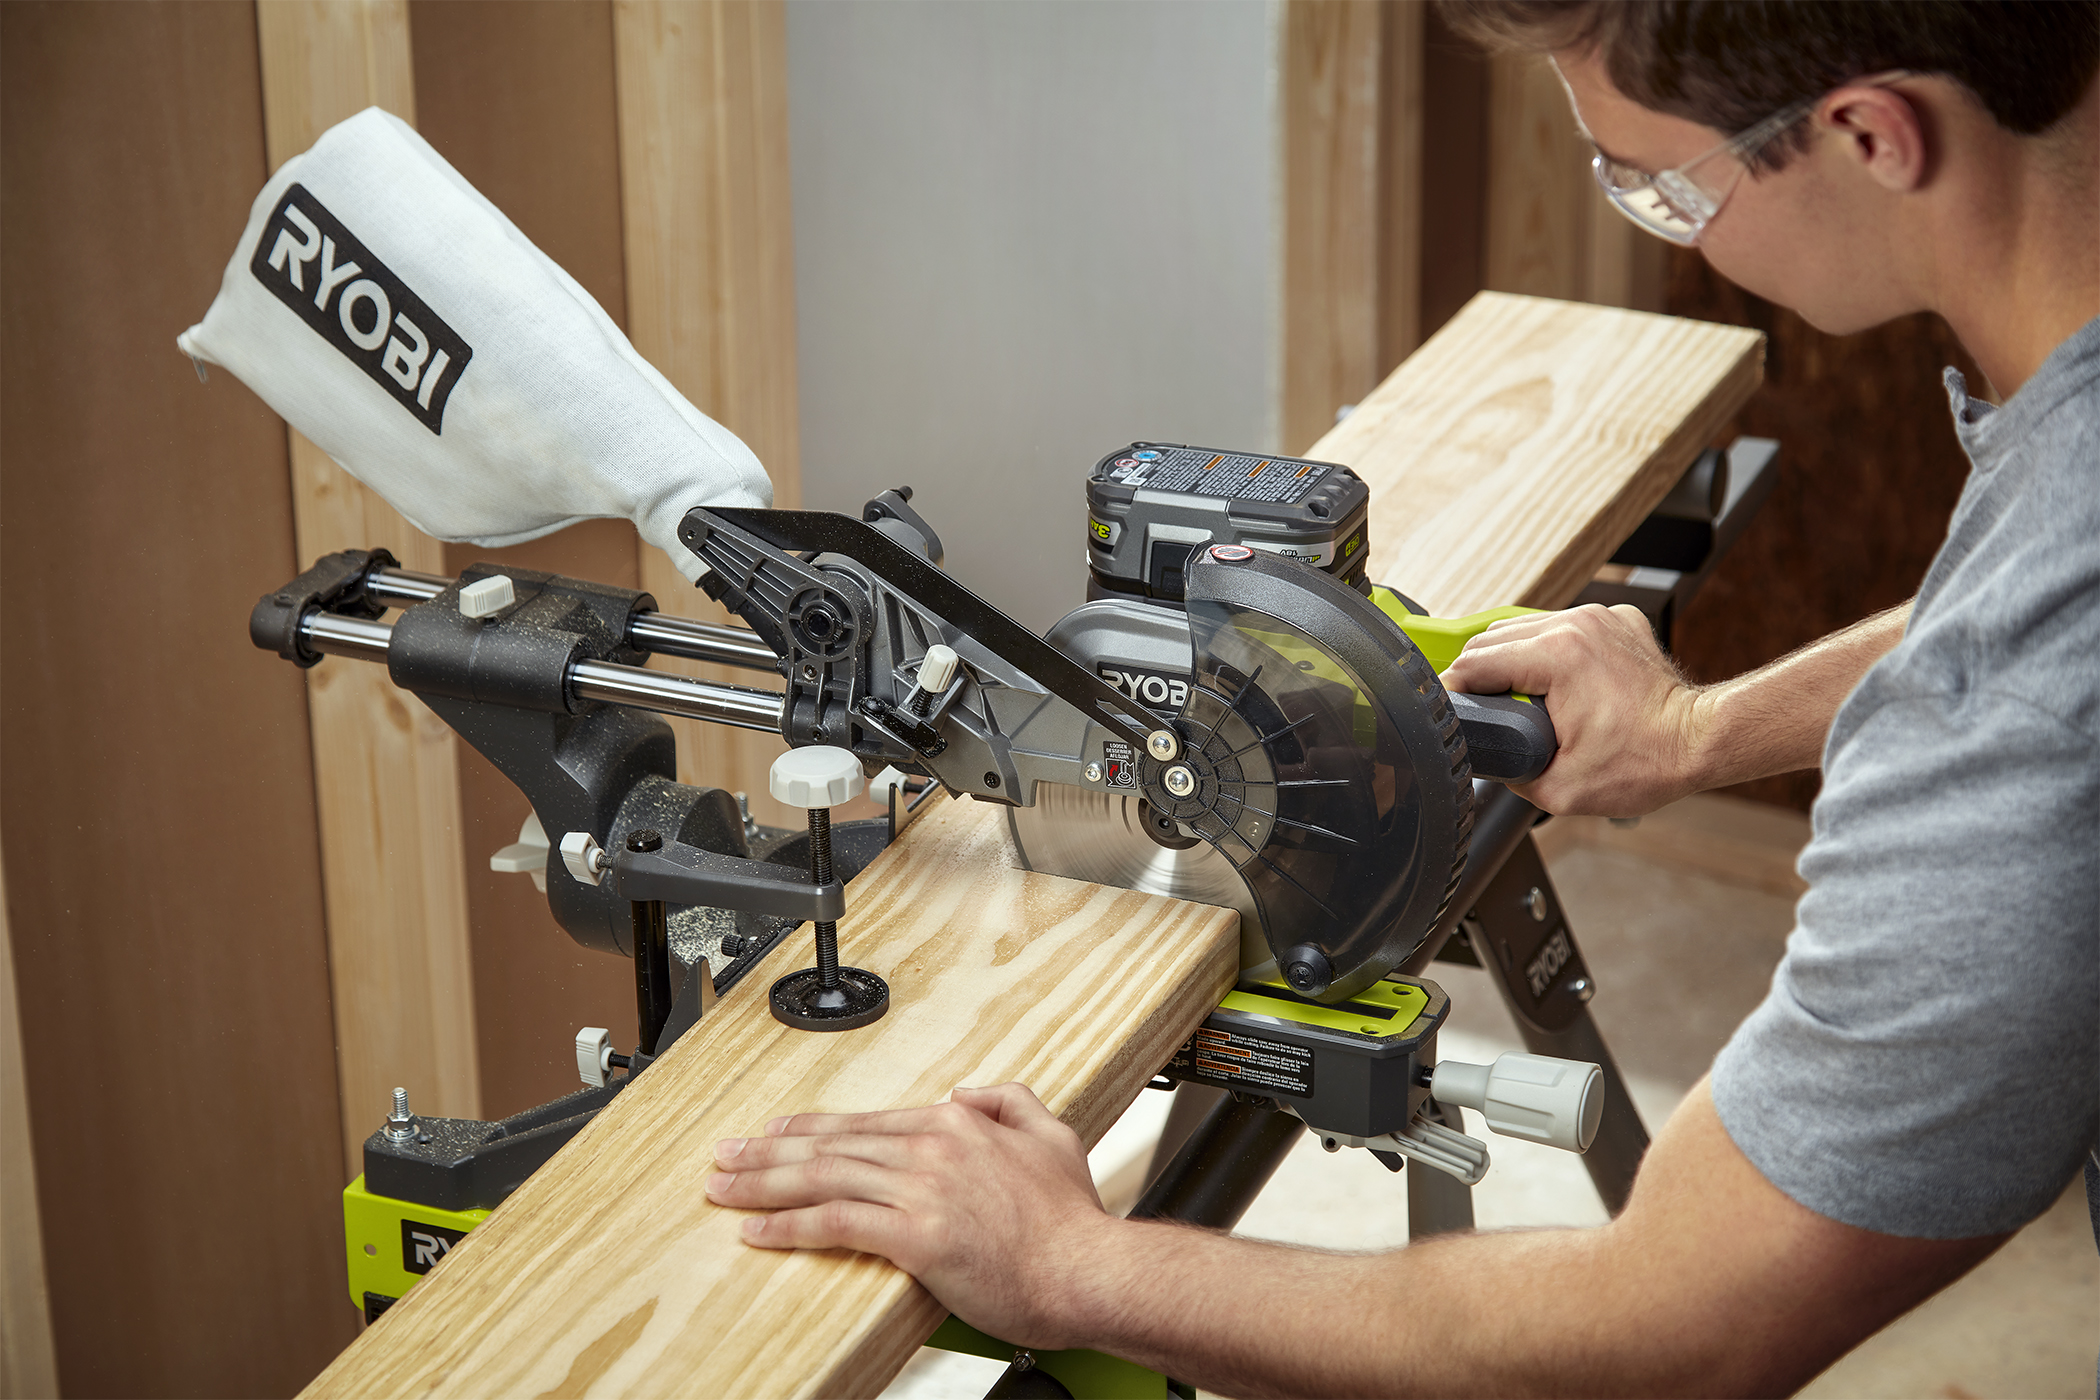 Looking to Buy The Best Miter Box in 2023. See Our Top Picks Here